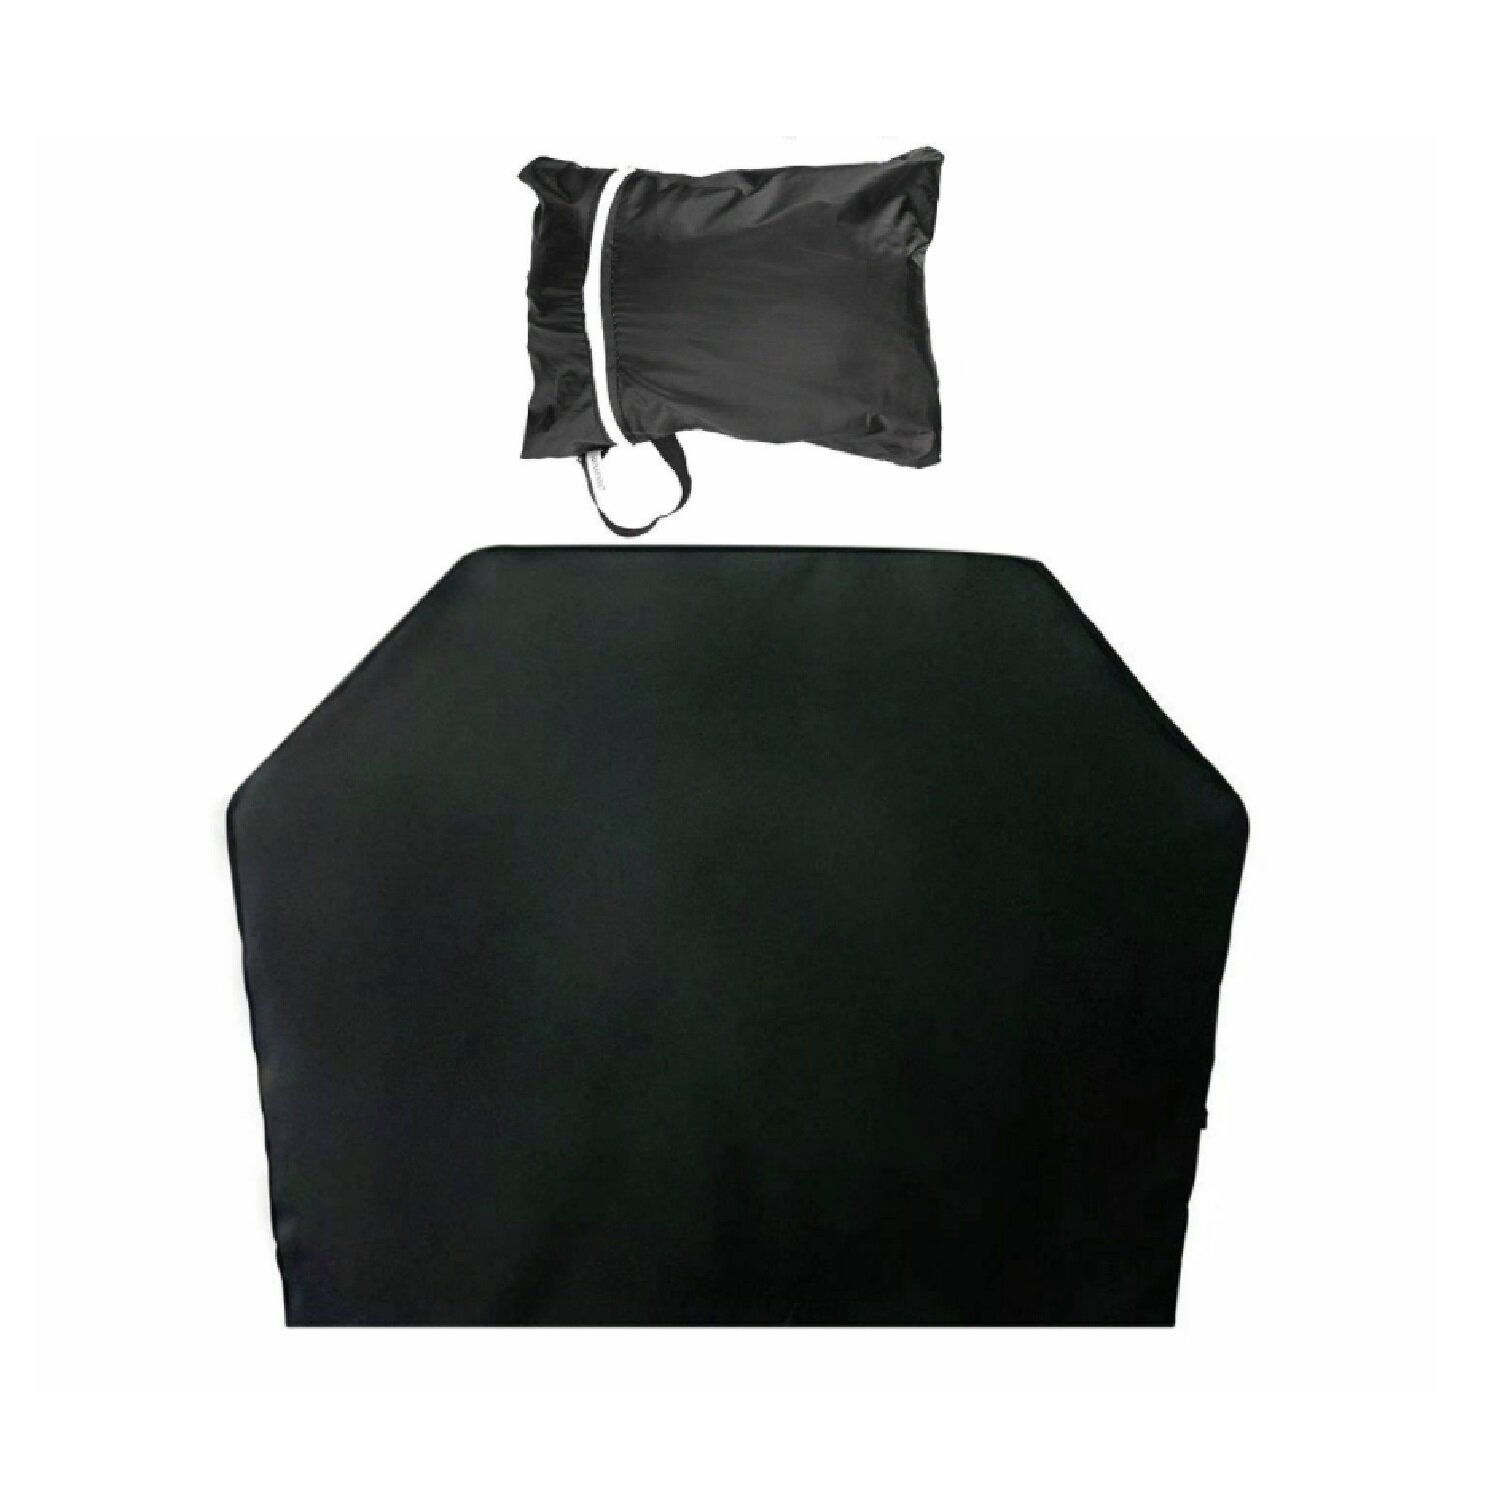 BBQ Gas Grill Cover Barbecue Waterproof Garden Outdoor Heavy Duty Protection 